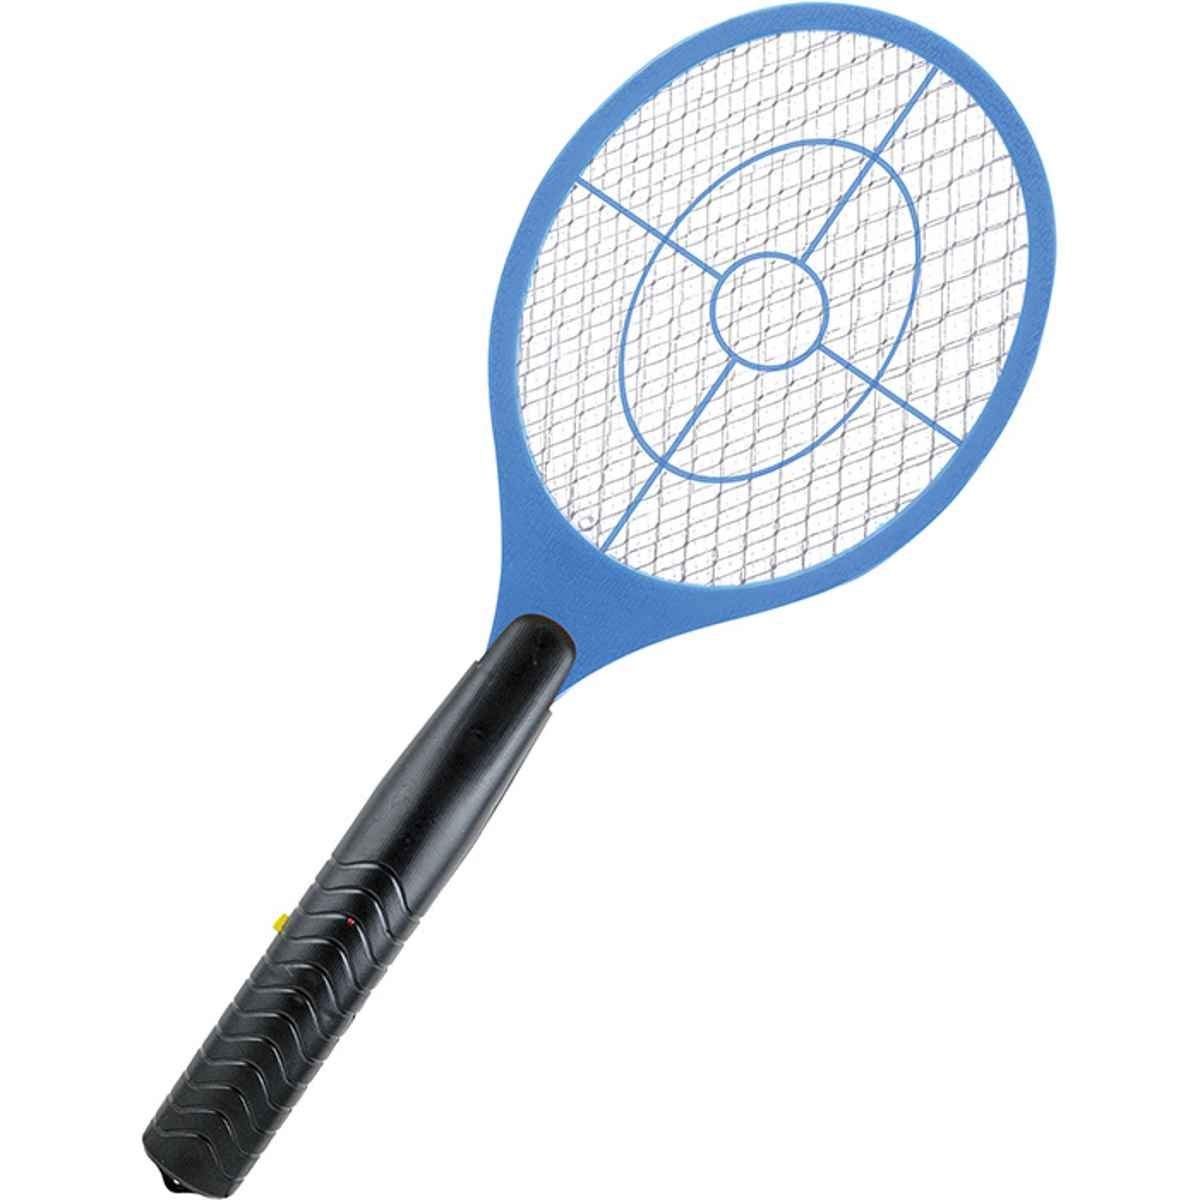 PIC PCOZAPRAK Handheld Mosquito and Flying Insect Bug Zapper, Black/Blue NEEDS 2 AA